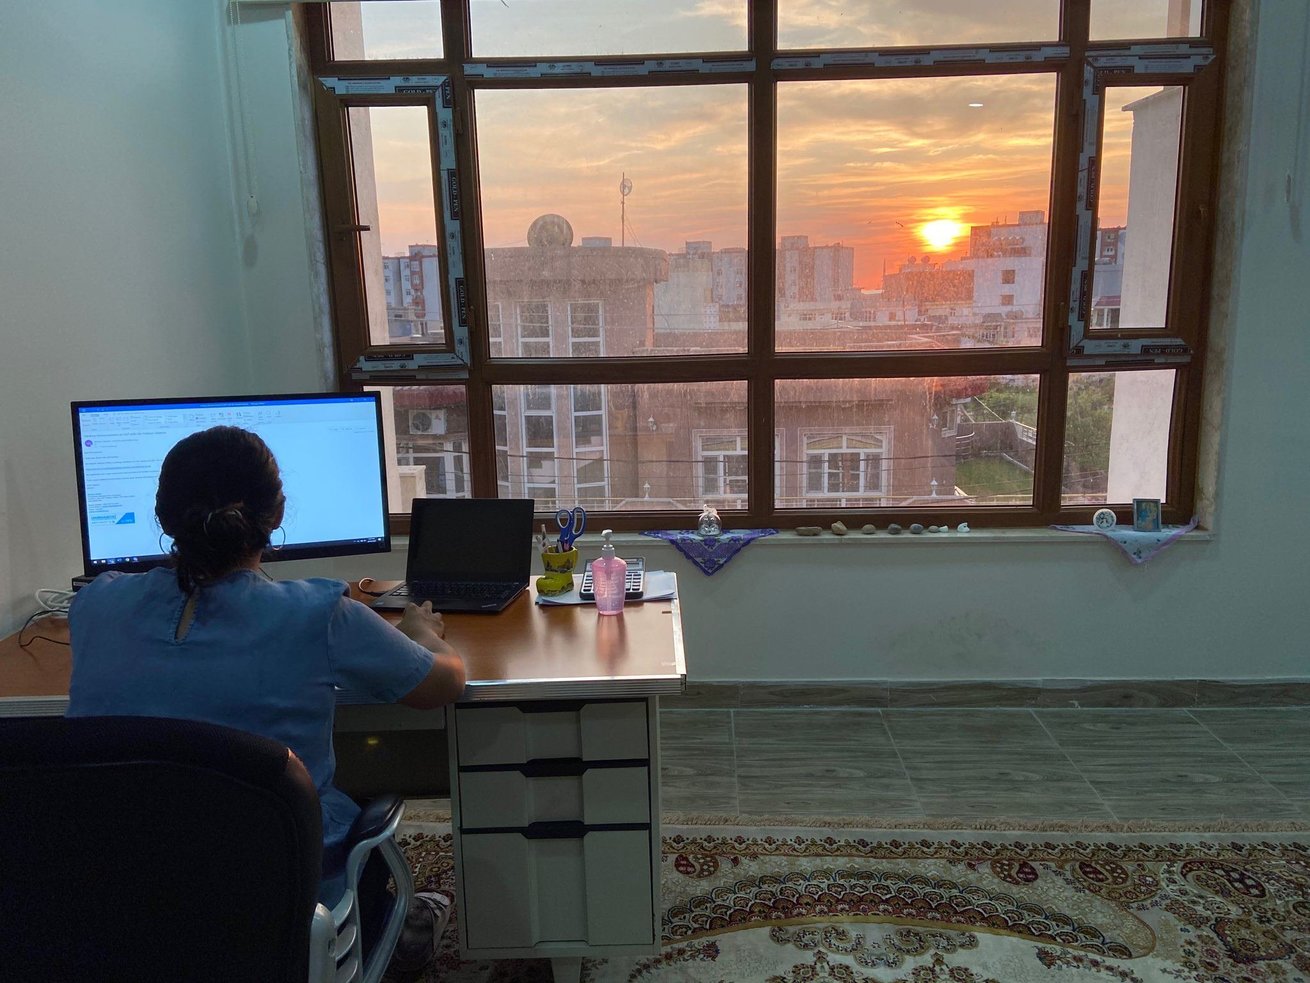 Meet Shanti Chirayath, CARE program officer in Iraq, who recounts the first weeks of lockdown, the challenges of remote programming and what it’s like to celebrate one’s birthday in times of social distancing.